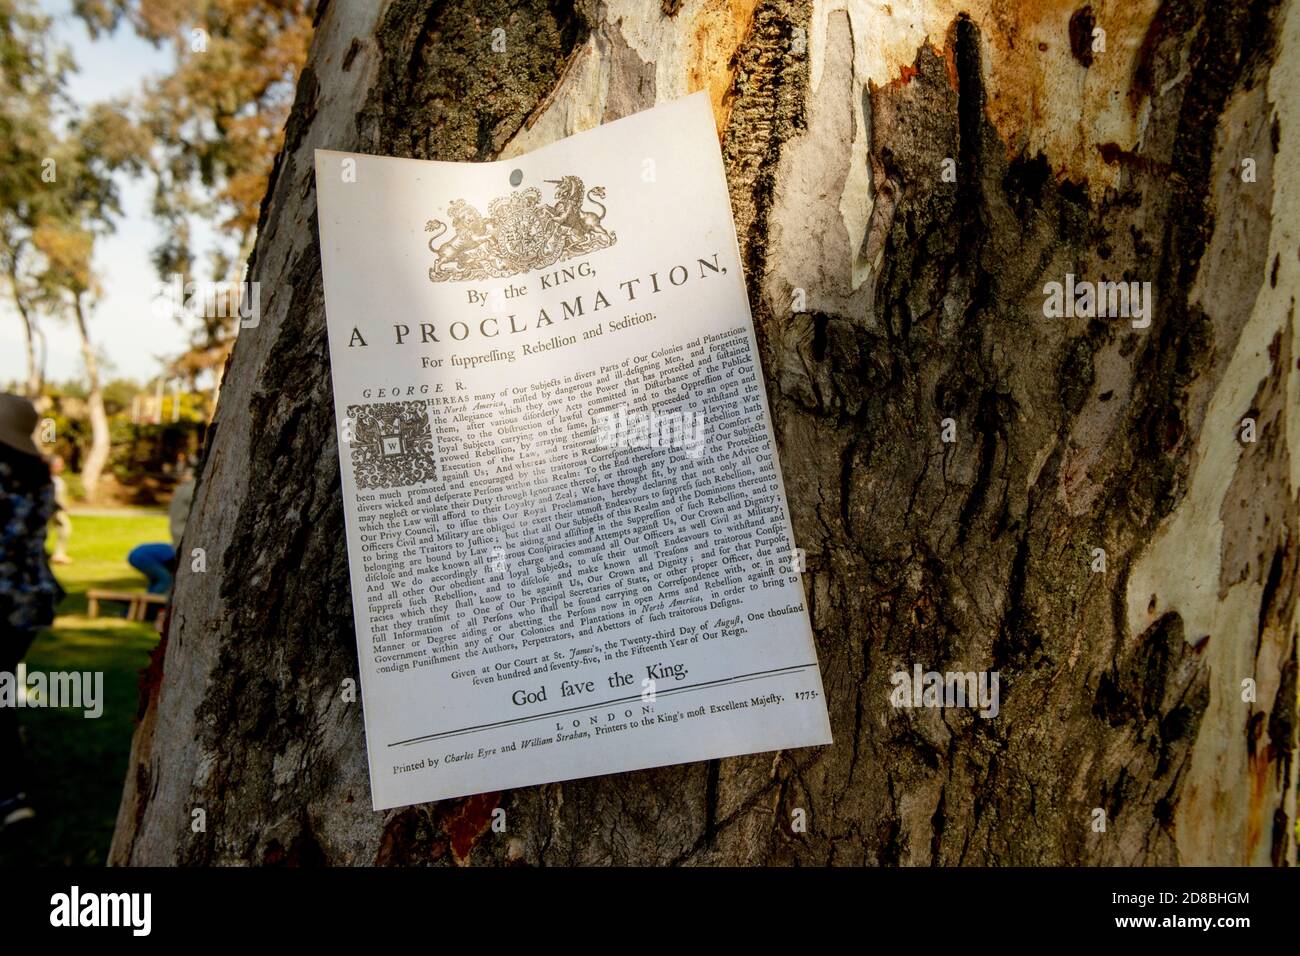 A facsimile of a 1775 proclamation from King George III warning American colonists against revolting against the crown is nailed to a treee at an Amer Stock Photo